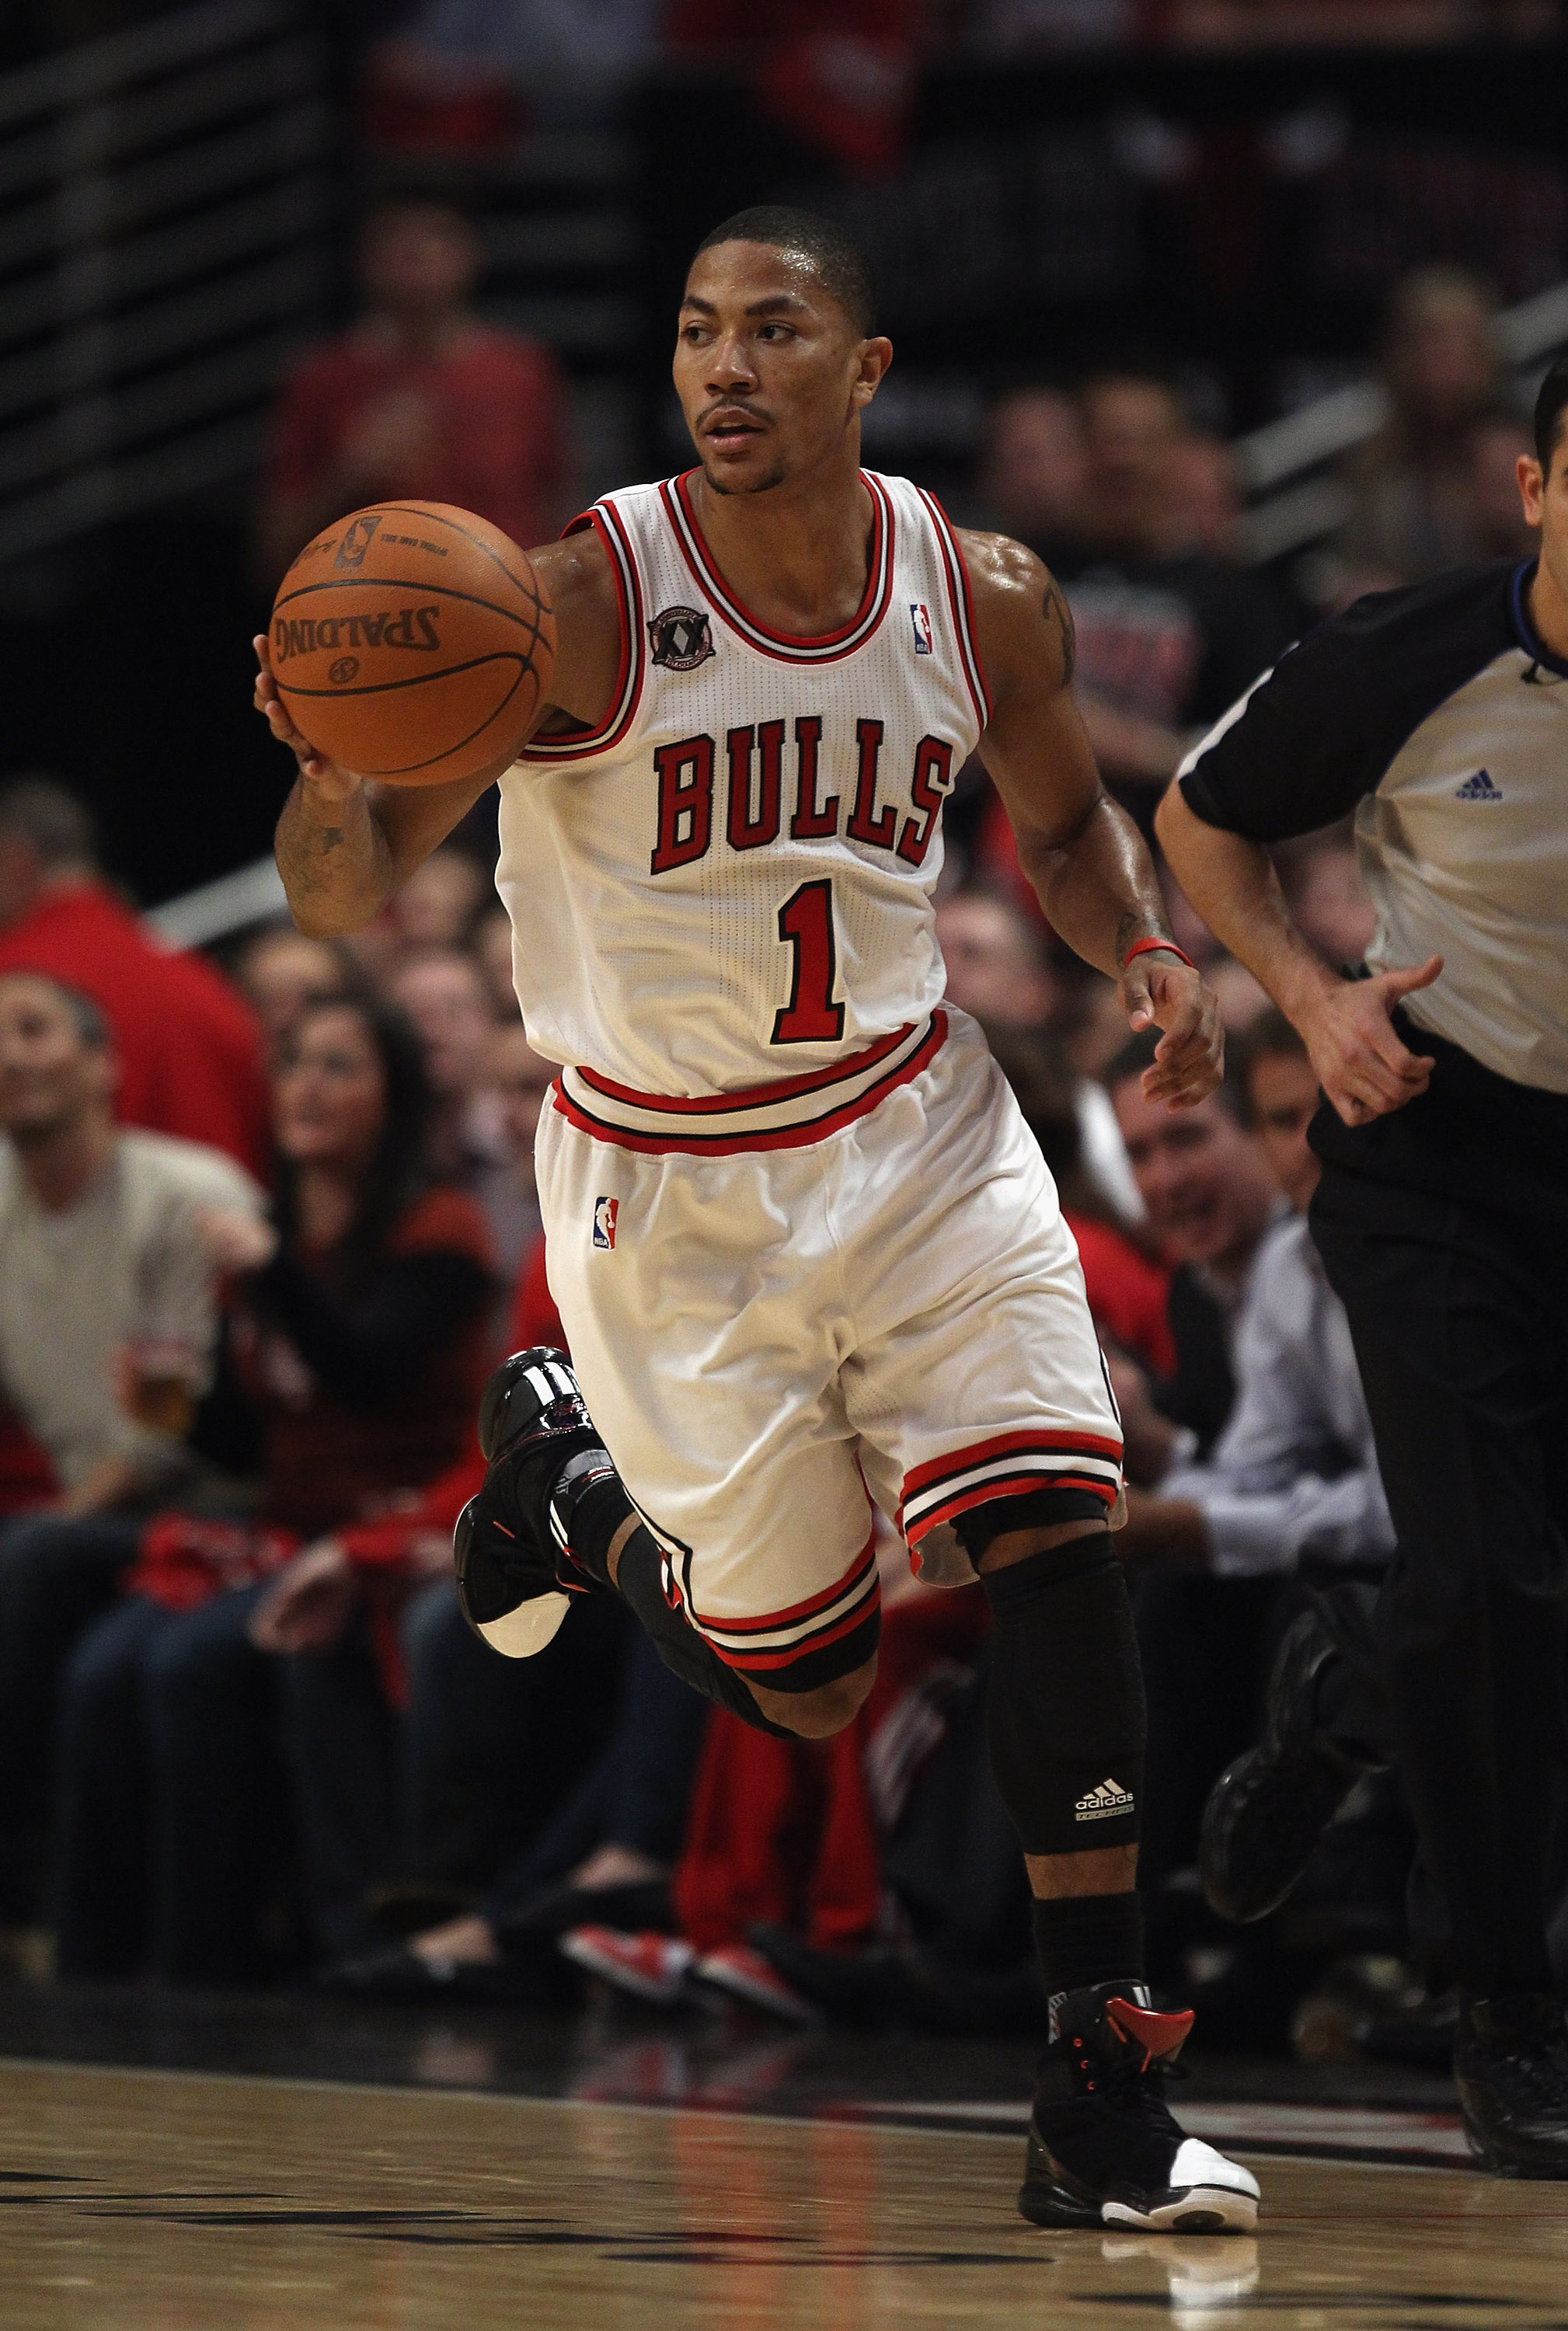 Basketball Forever - The Chicago Bulls will be wearing one of the SICKEST  throwback jerseys in NBA history next season. Here's Derrick Rose in the  Chicago Script Retro's. 󾟖󾭻󾓶